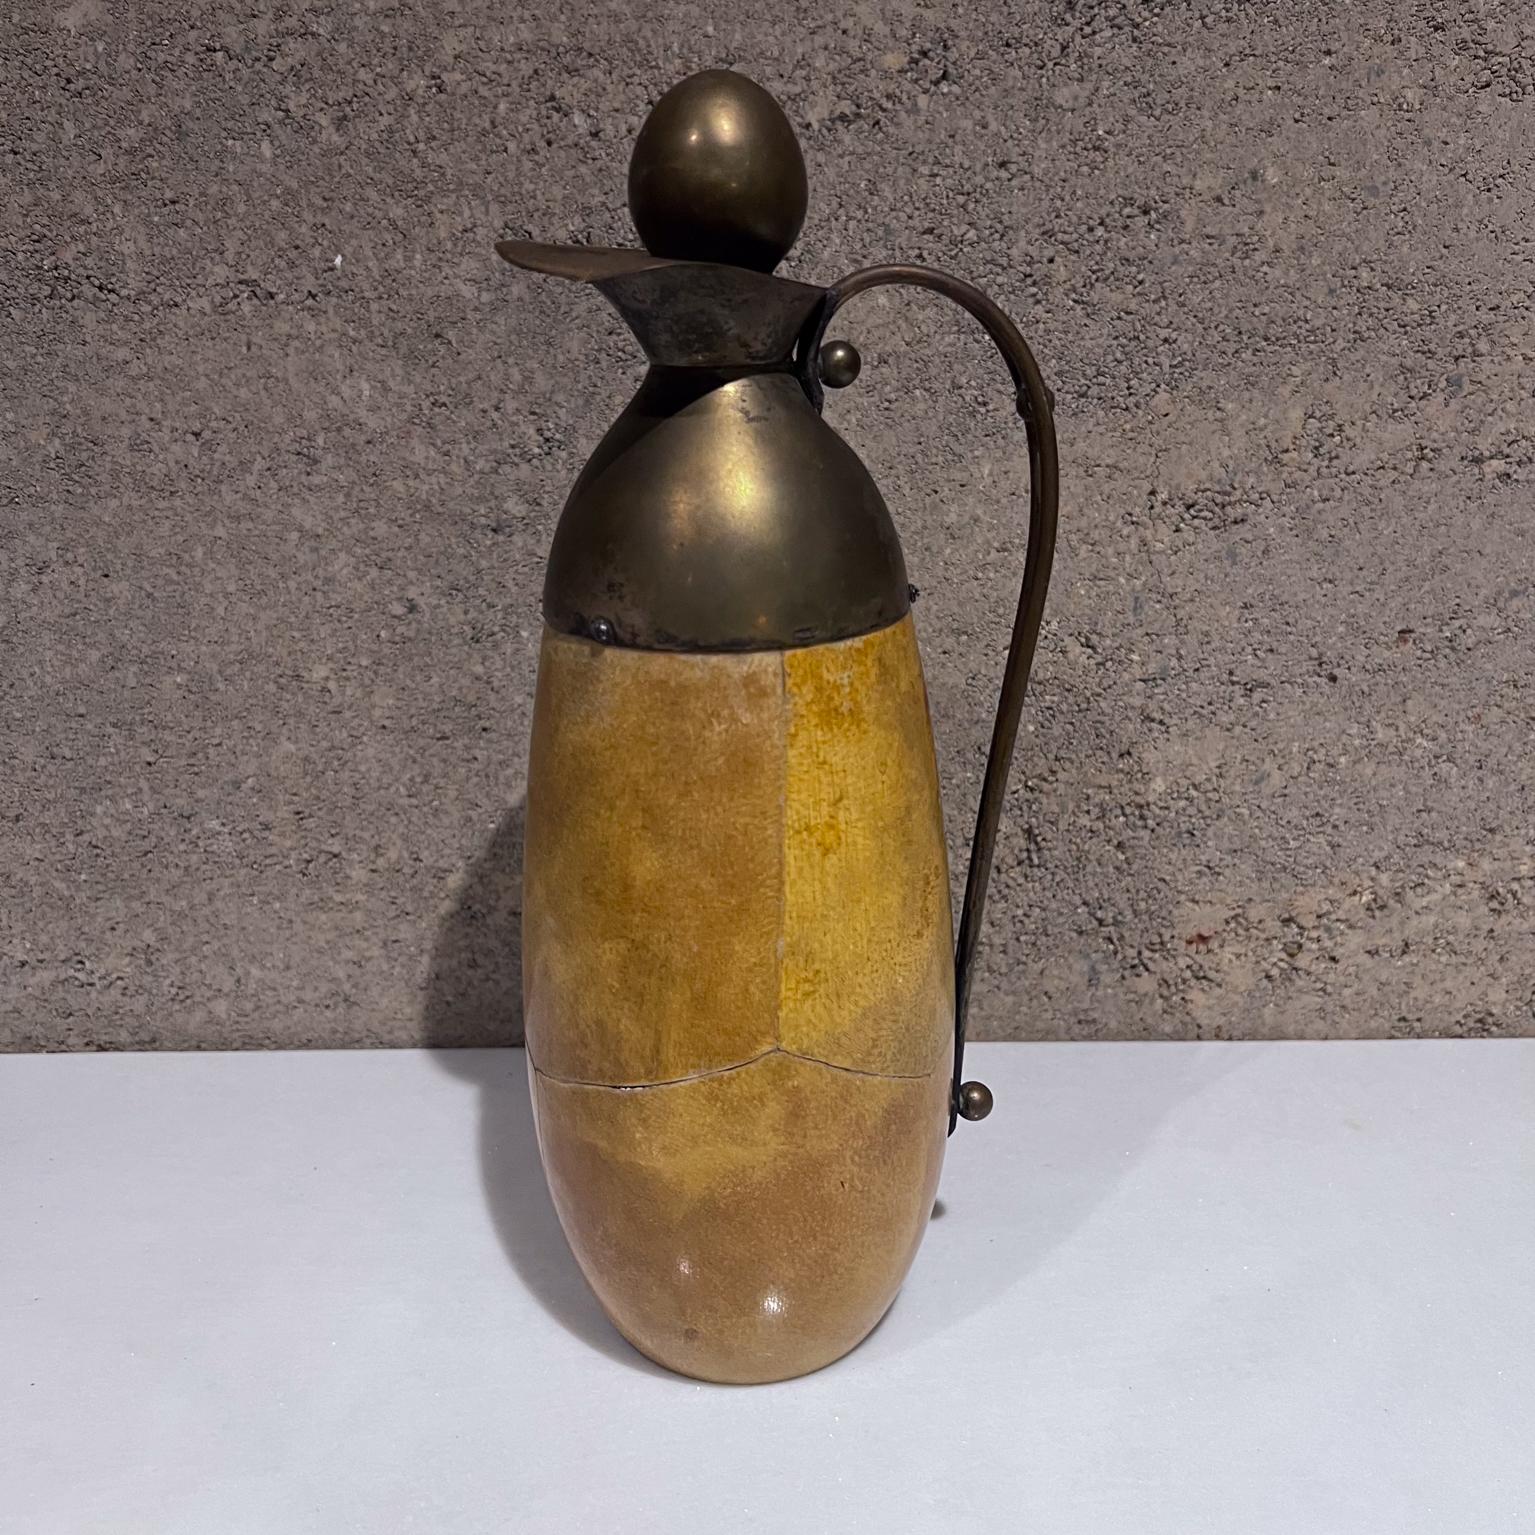 AMBIANIC presents
1950s Aldo Tura Goatskin and Brass Carafe Thermos Pitcher Barware
made in Italy, maker stamped.
11.5 h x 3.75 diameter x 4.5 d
Preowned vintage wear, see all images provided.